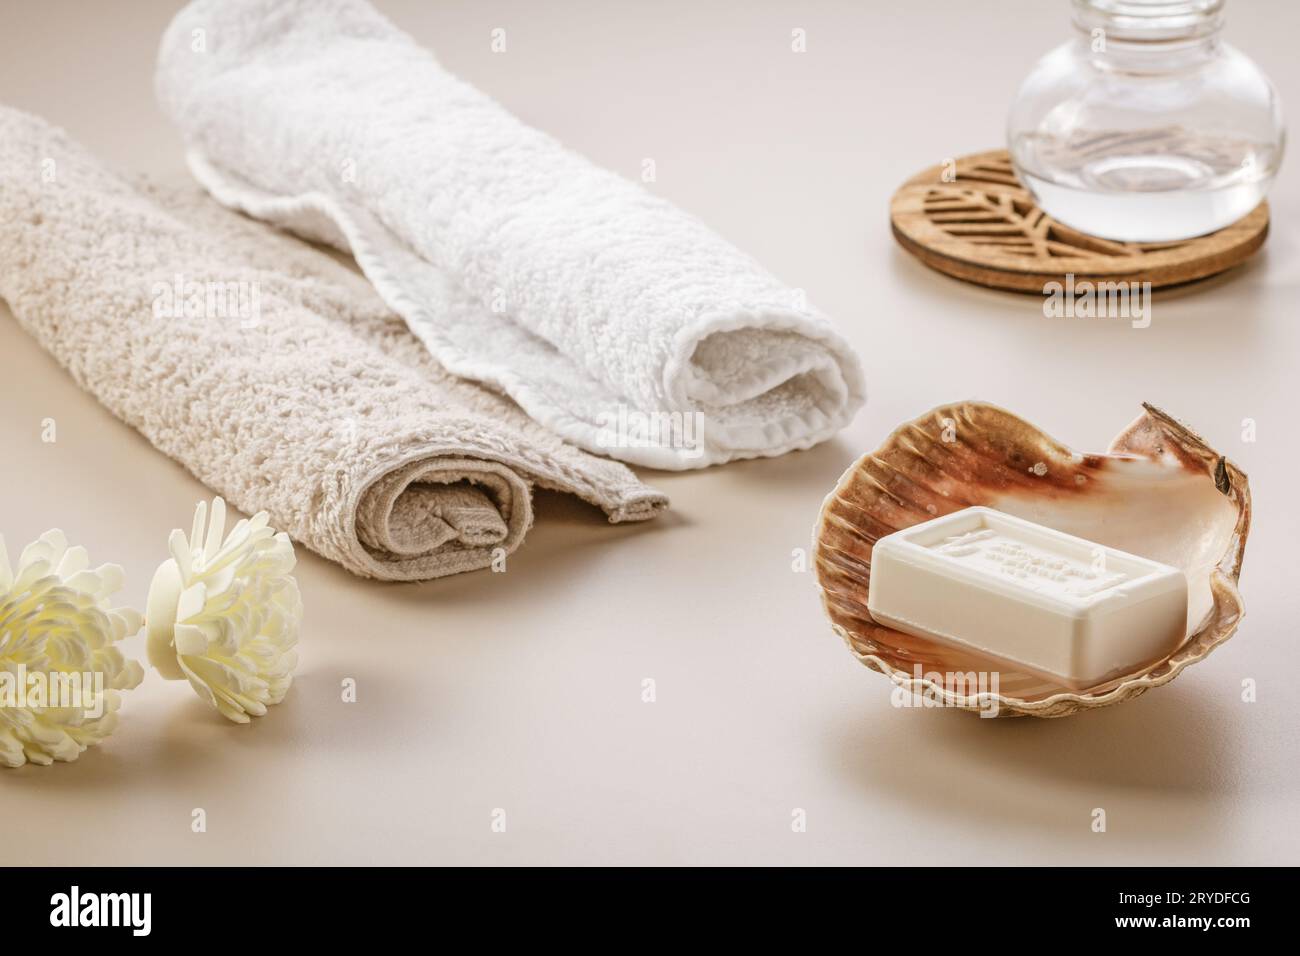 Minimalistic Scandinavian style. Two soft towels, dried flowers and a bar of soap in a seashell on the dressing table. Stock Photo